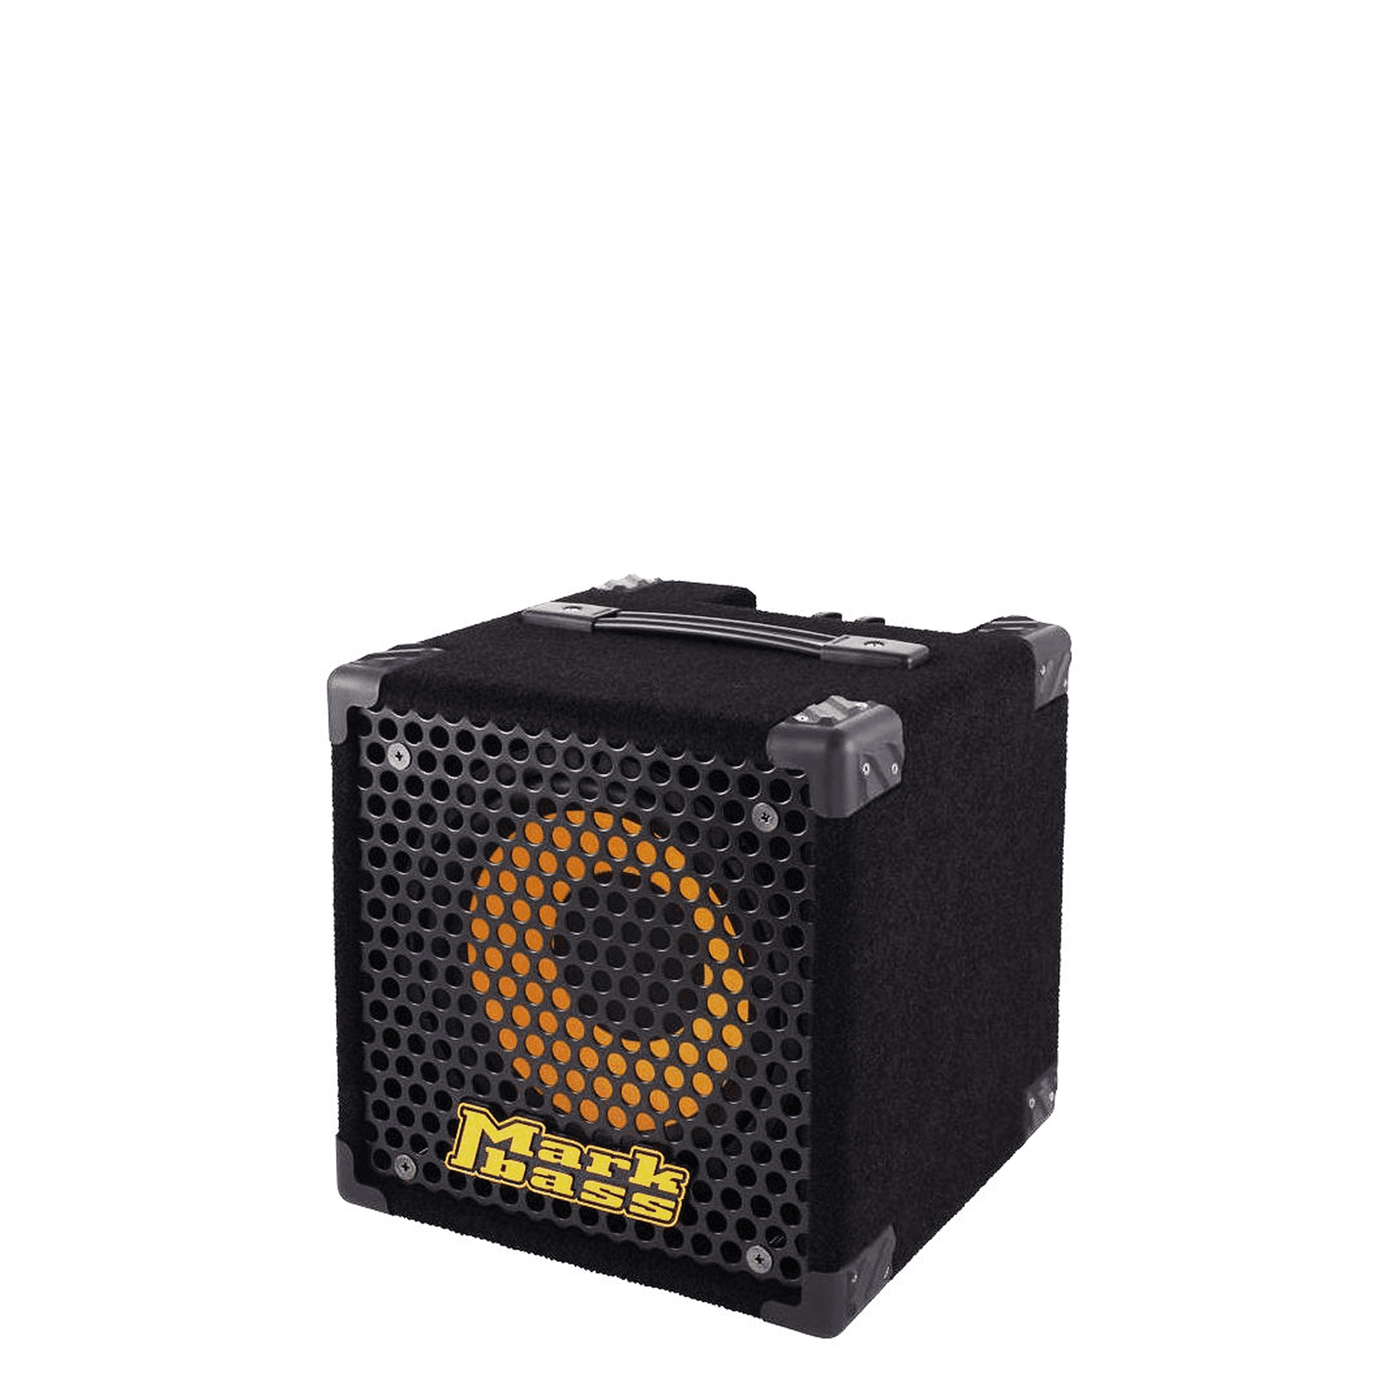 Markbass Micromark 801 Combo - The Micromark now has a big brother—one who is still small enough to deliver the Markbass sound anywhere, but big enough to provide a fuller sound with plenty of bottom end!The Micromark 801 features a single yellow 8” Markb